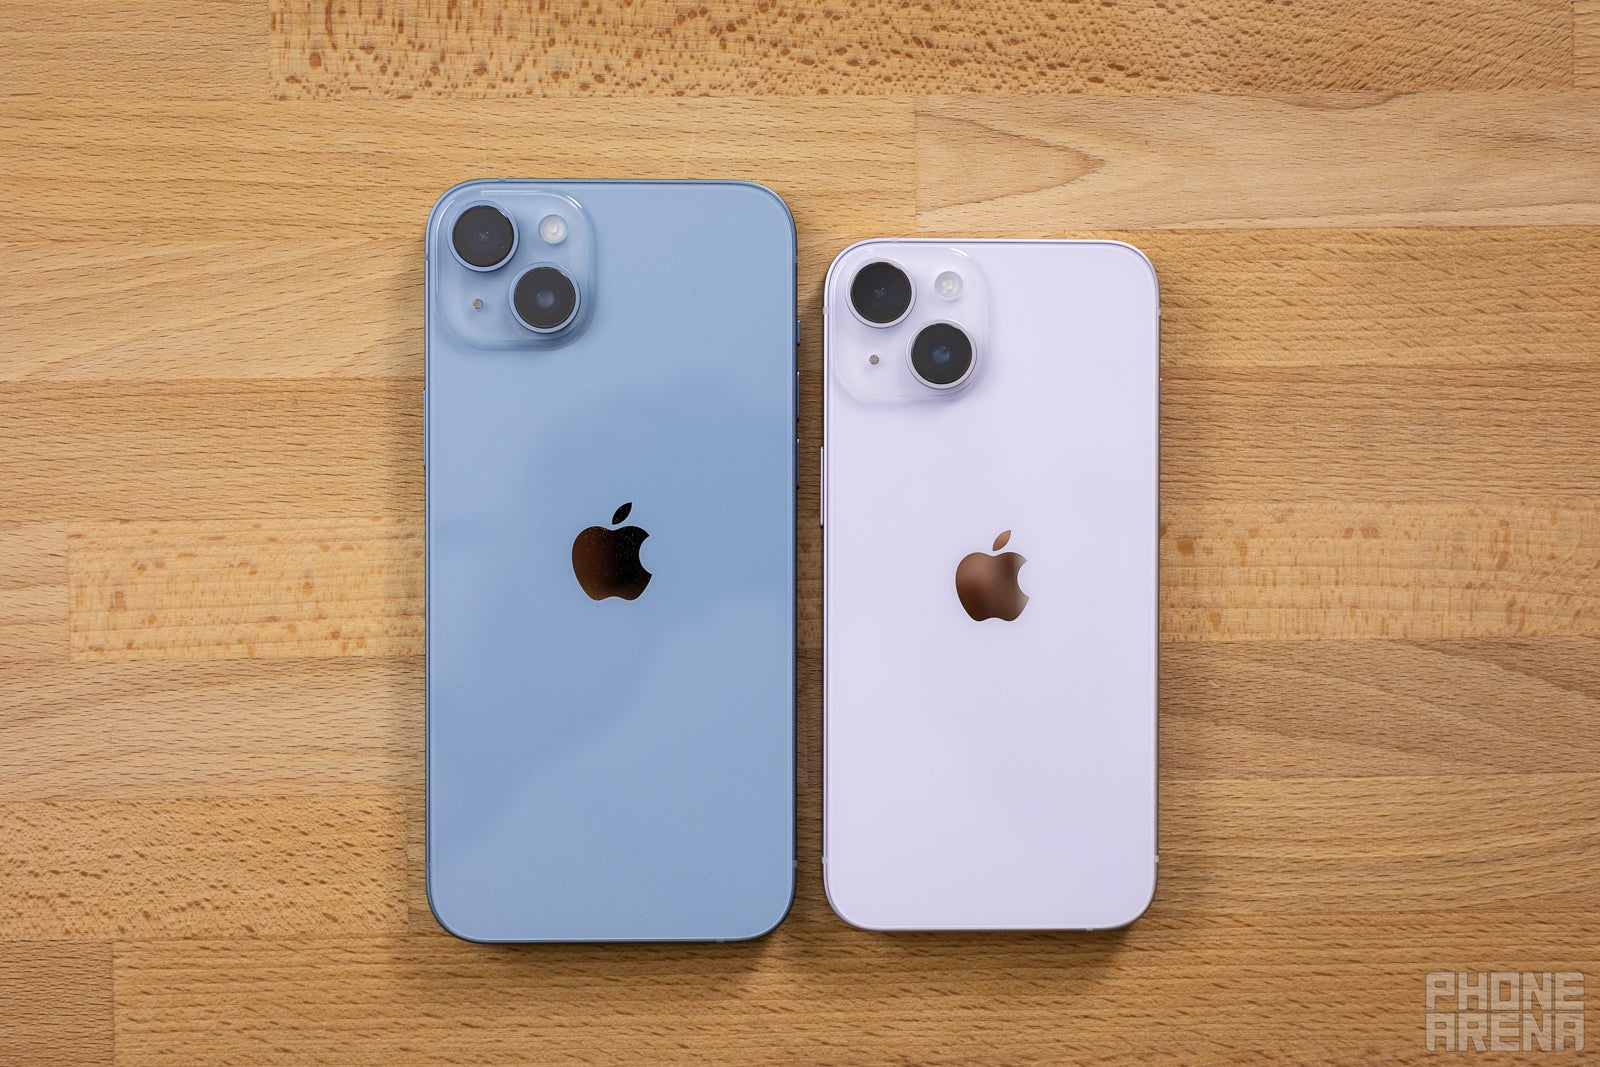 iPhone 14 and iPhone 14 Plus